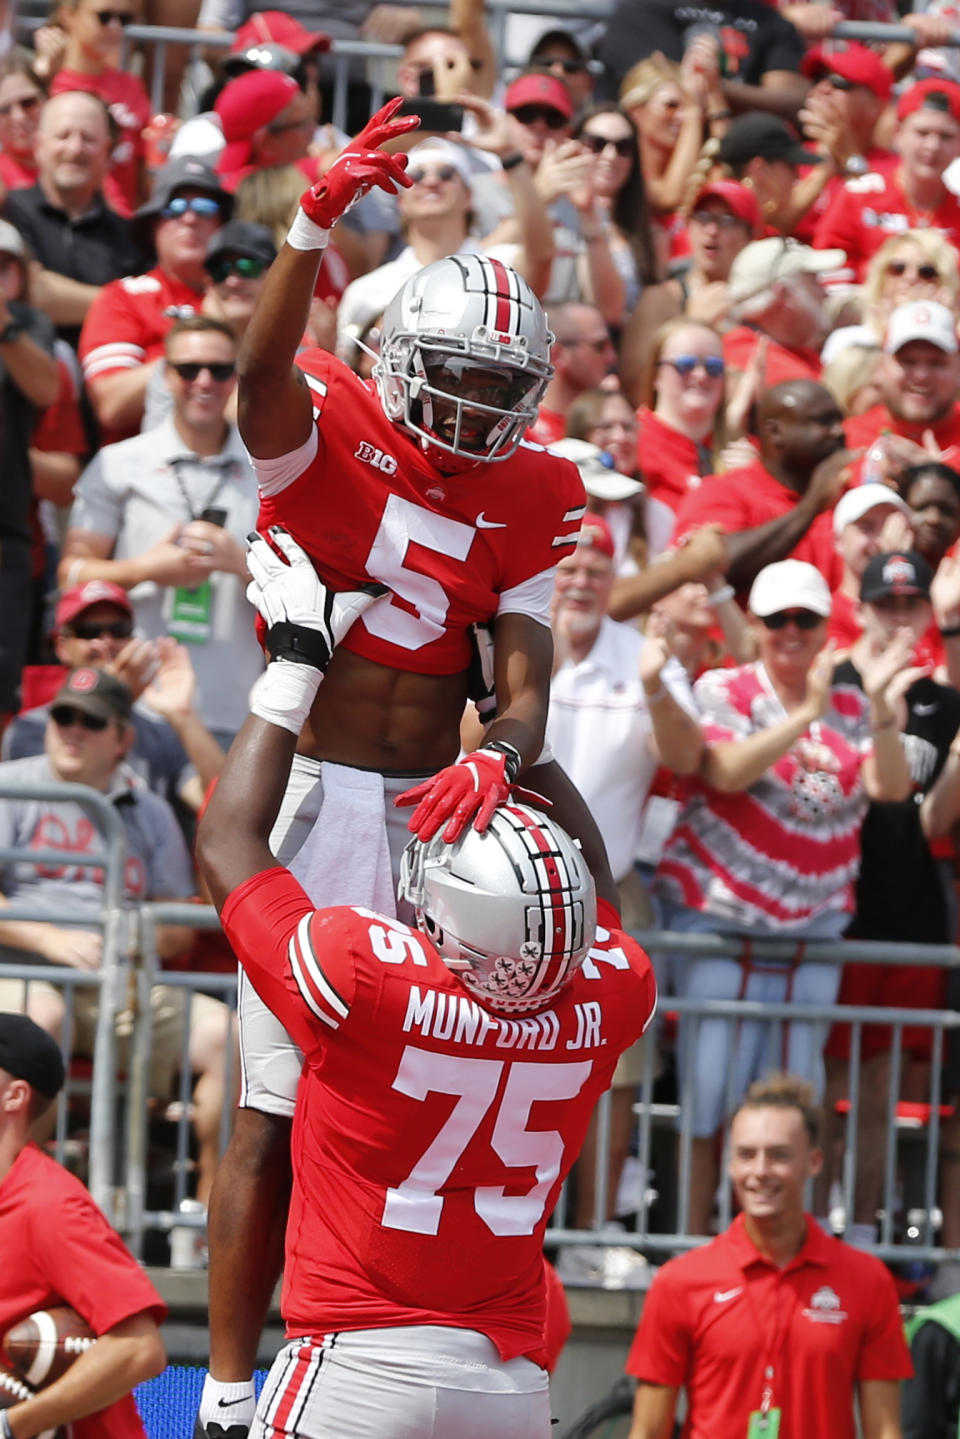 Ohio State receiver Garrett Wilson, top, celebrates his touchdown against Oregon with teammate offensive lineman Thayer Munford during the first half of an NCAA college football game Saturday, Sept. 11, 2021, in Columbus, Ohio. (AP Photo/Jay LaPrete)